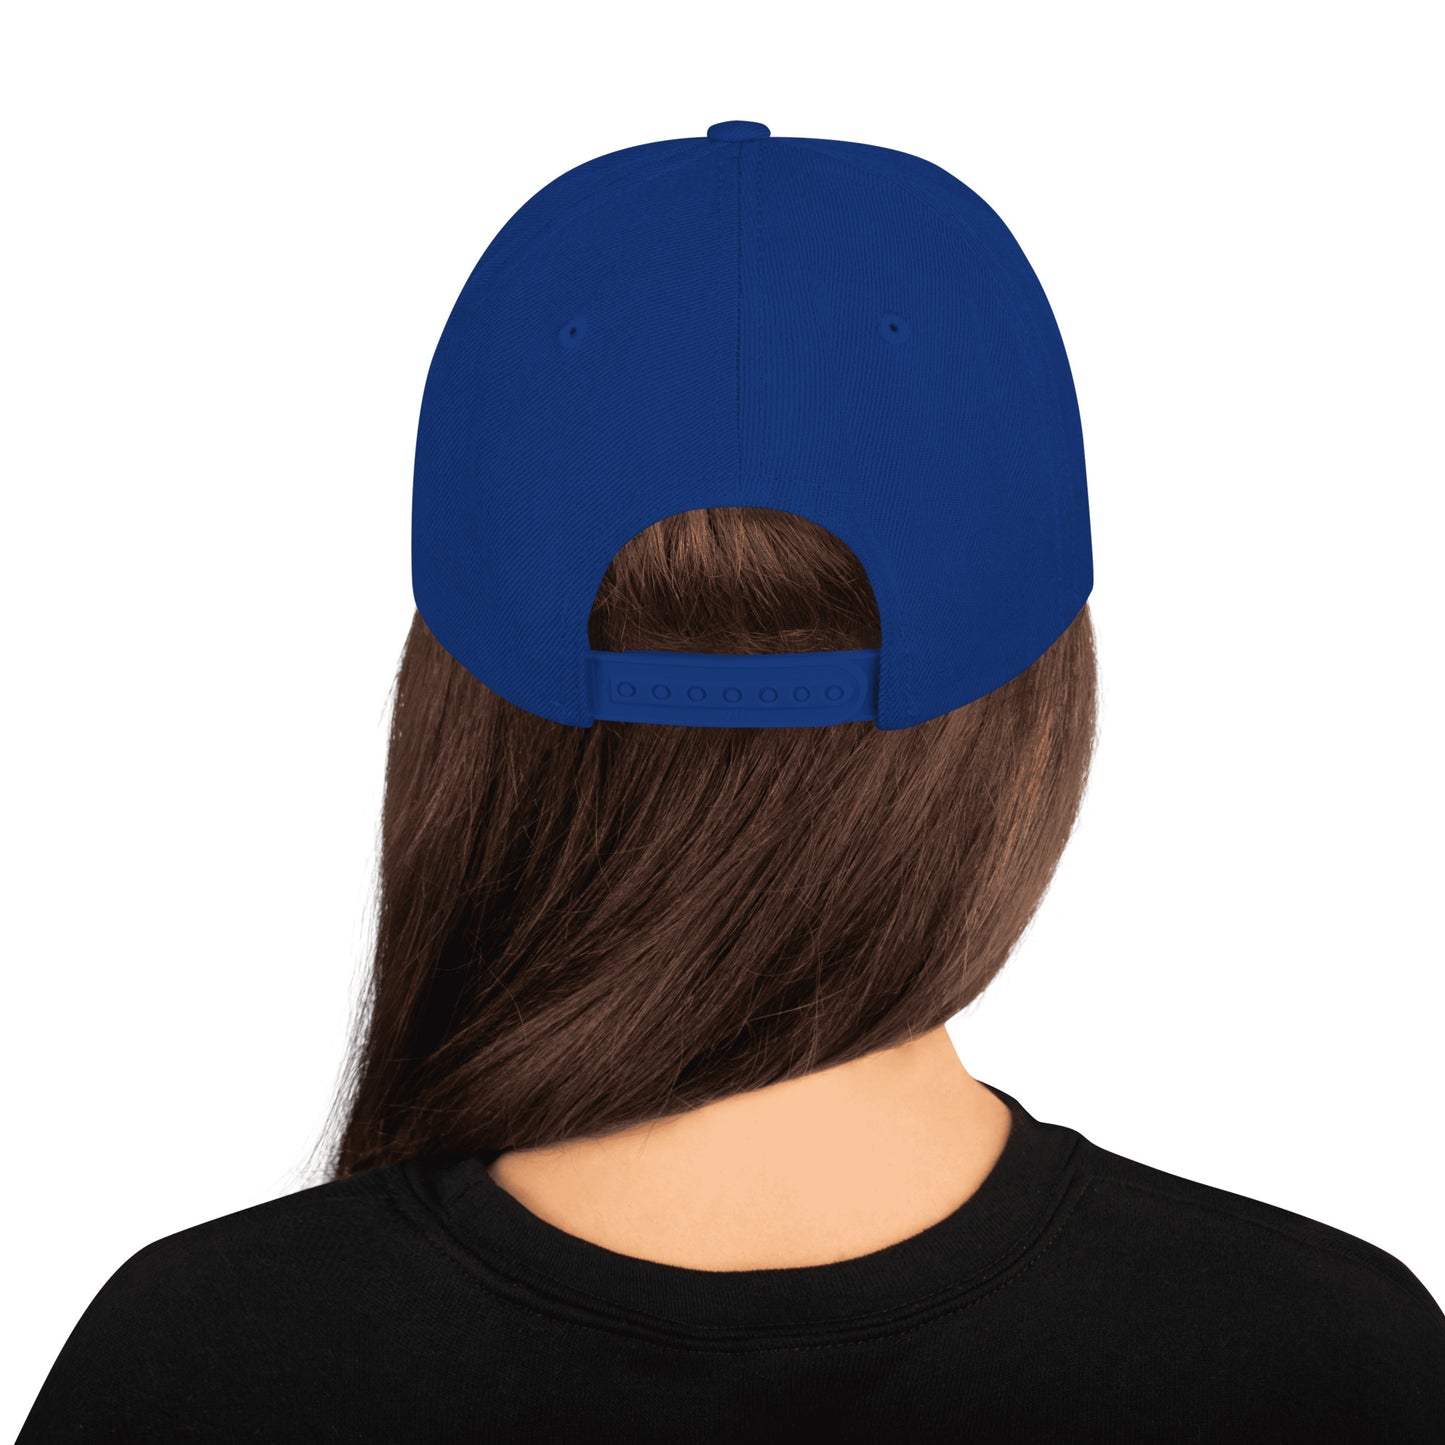 Blue Neighbor Snapback Hat - Comedy the Brand - Stand-Up Comedy Fan Gear